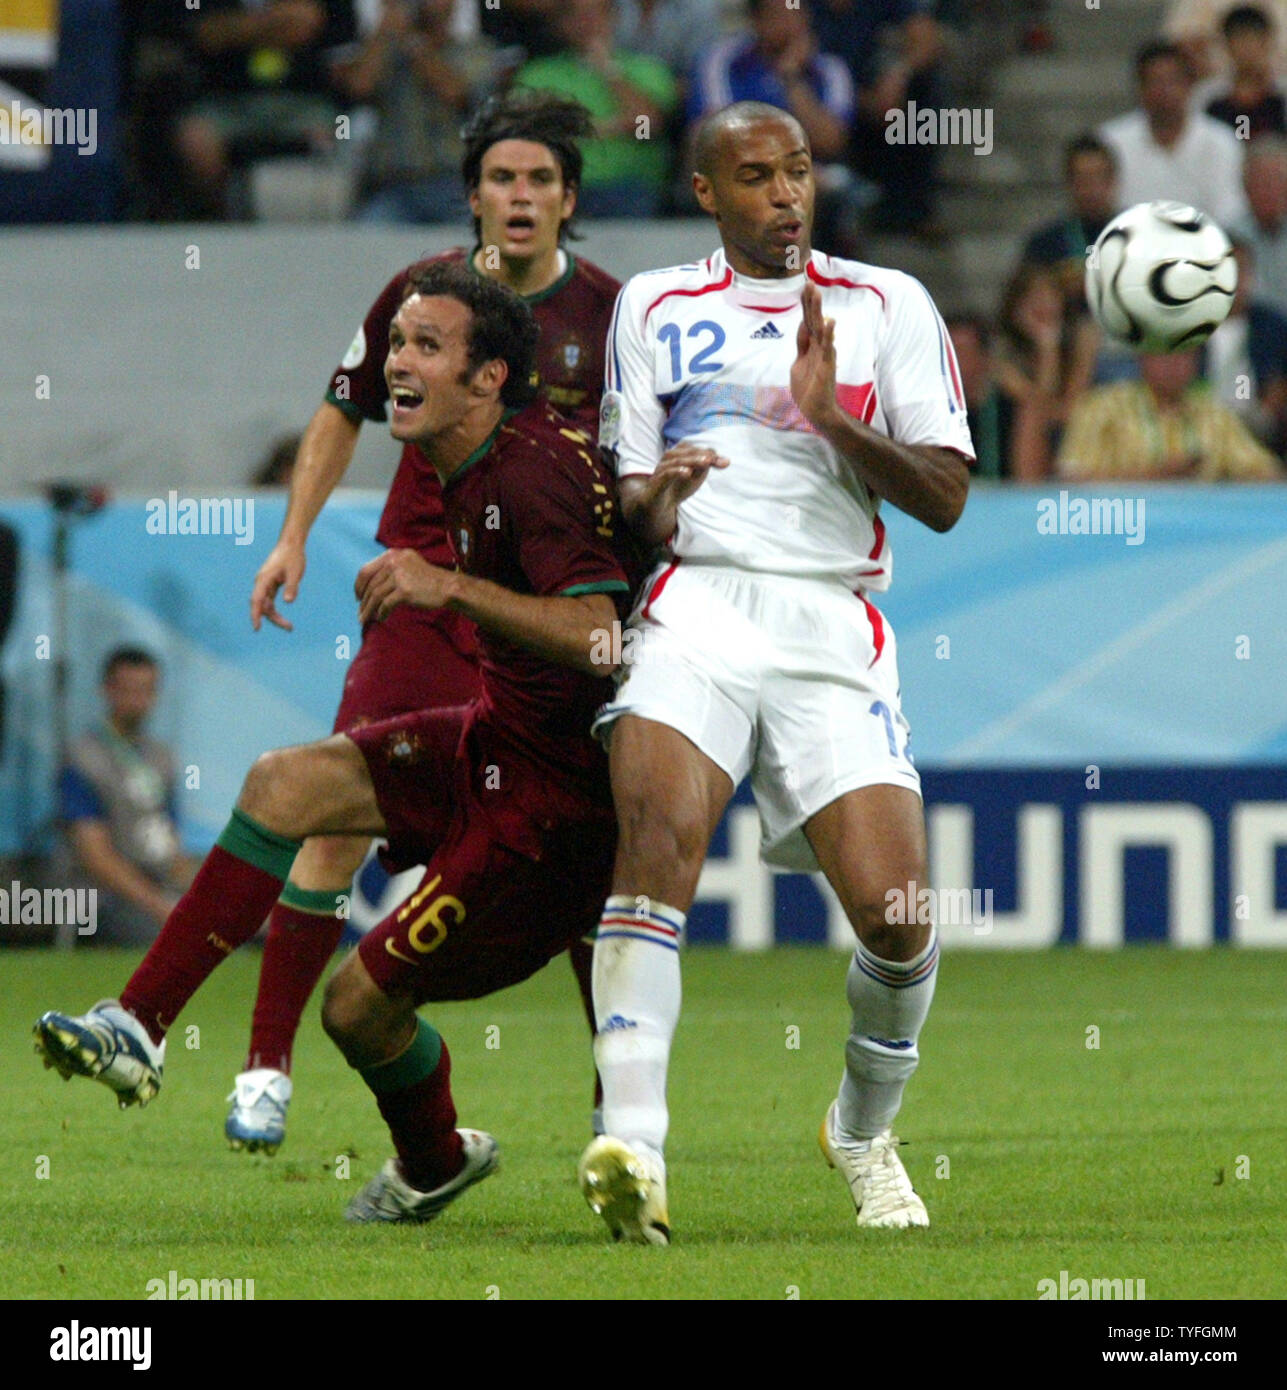 Thierry Henri of France (12) battles Portugal's Ricardo Carvalho (16) fight for the ball in World Cup soccer in Munich, Germany on July 5, 2006. France defeated Portugal 1-0.   (UPI Photo/Arthur Thill) Stock Photo